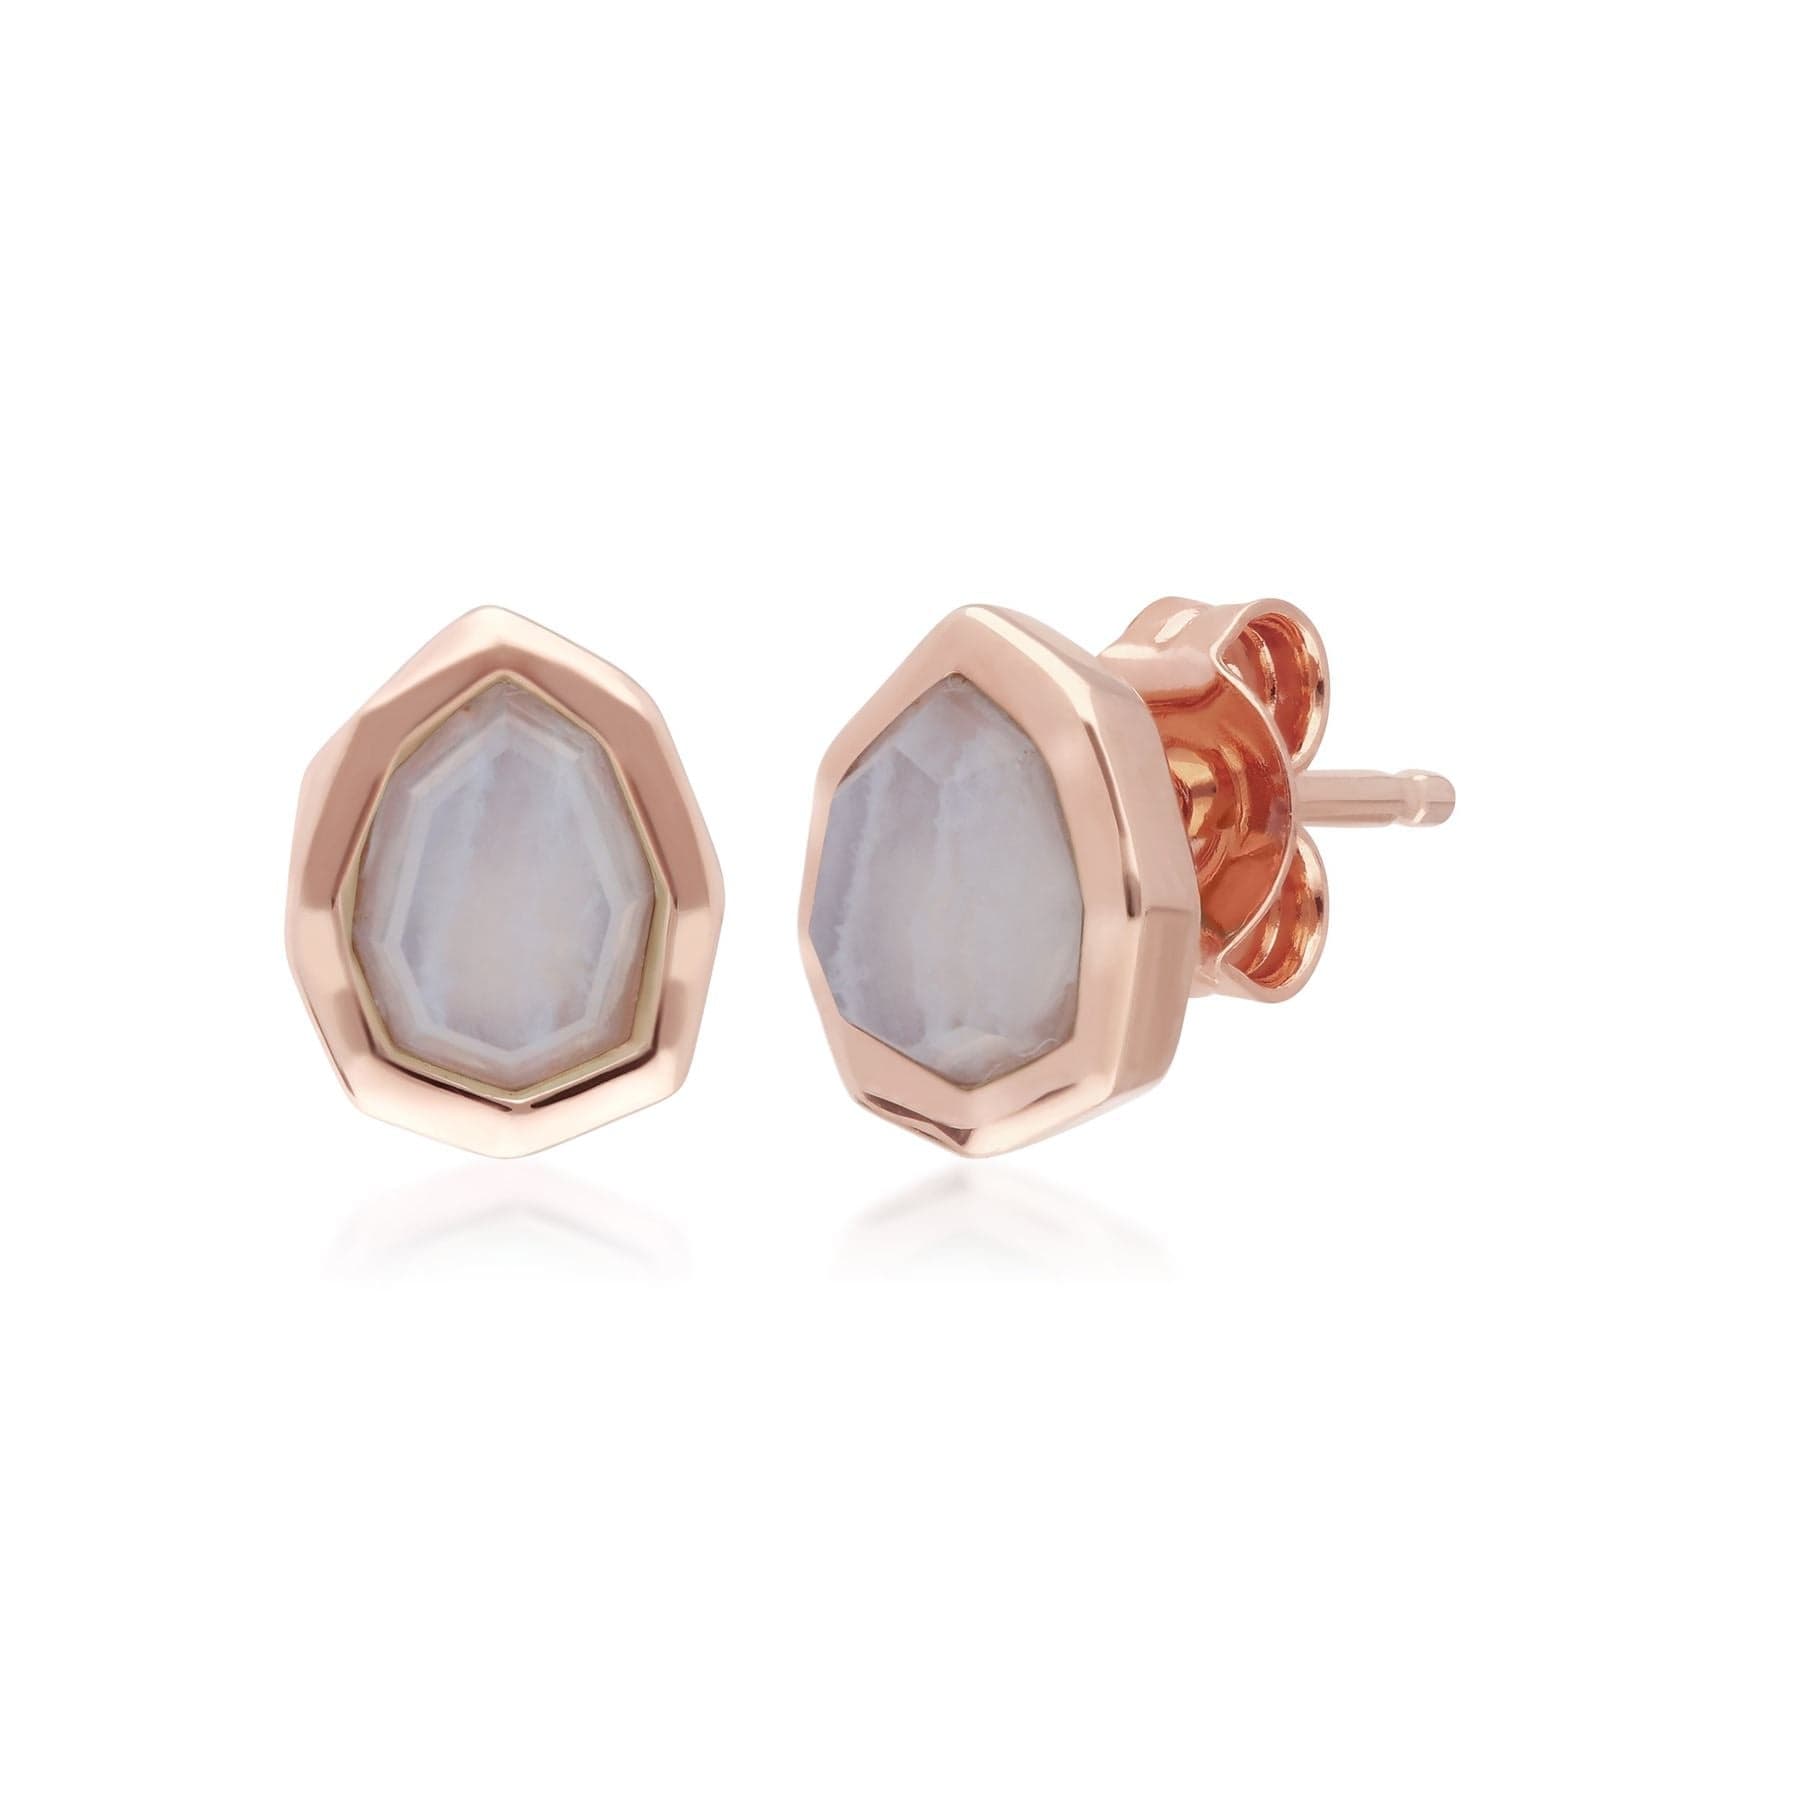 Image of Irregular B Gem Blue Lace Agate Stud Earrings in Rose Gold Plated Silver